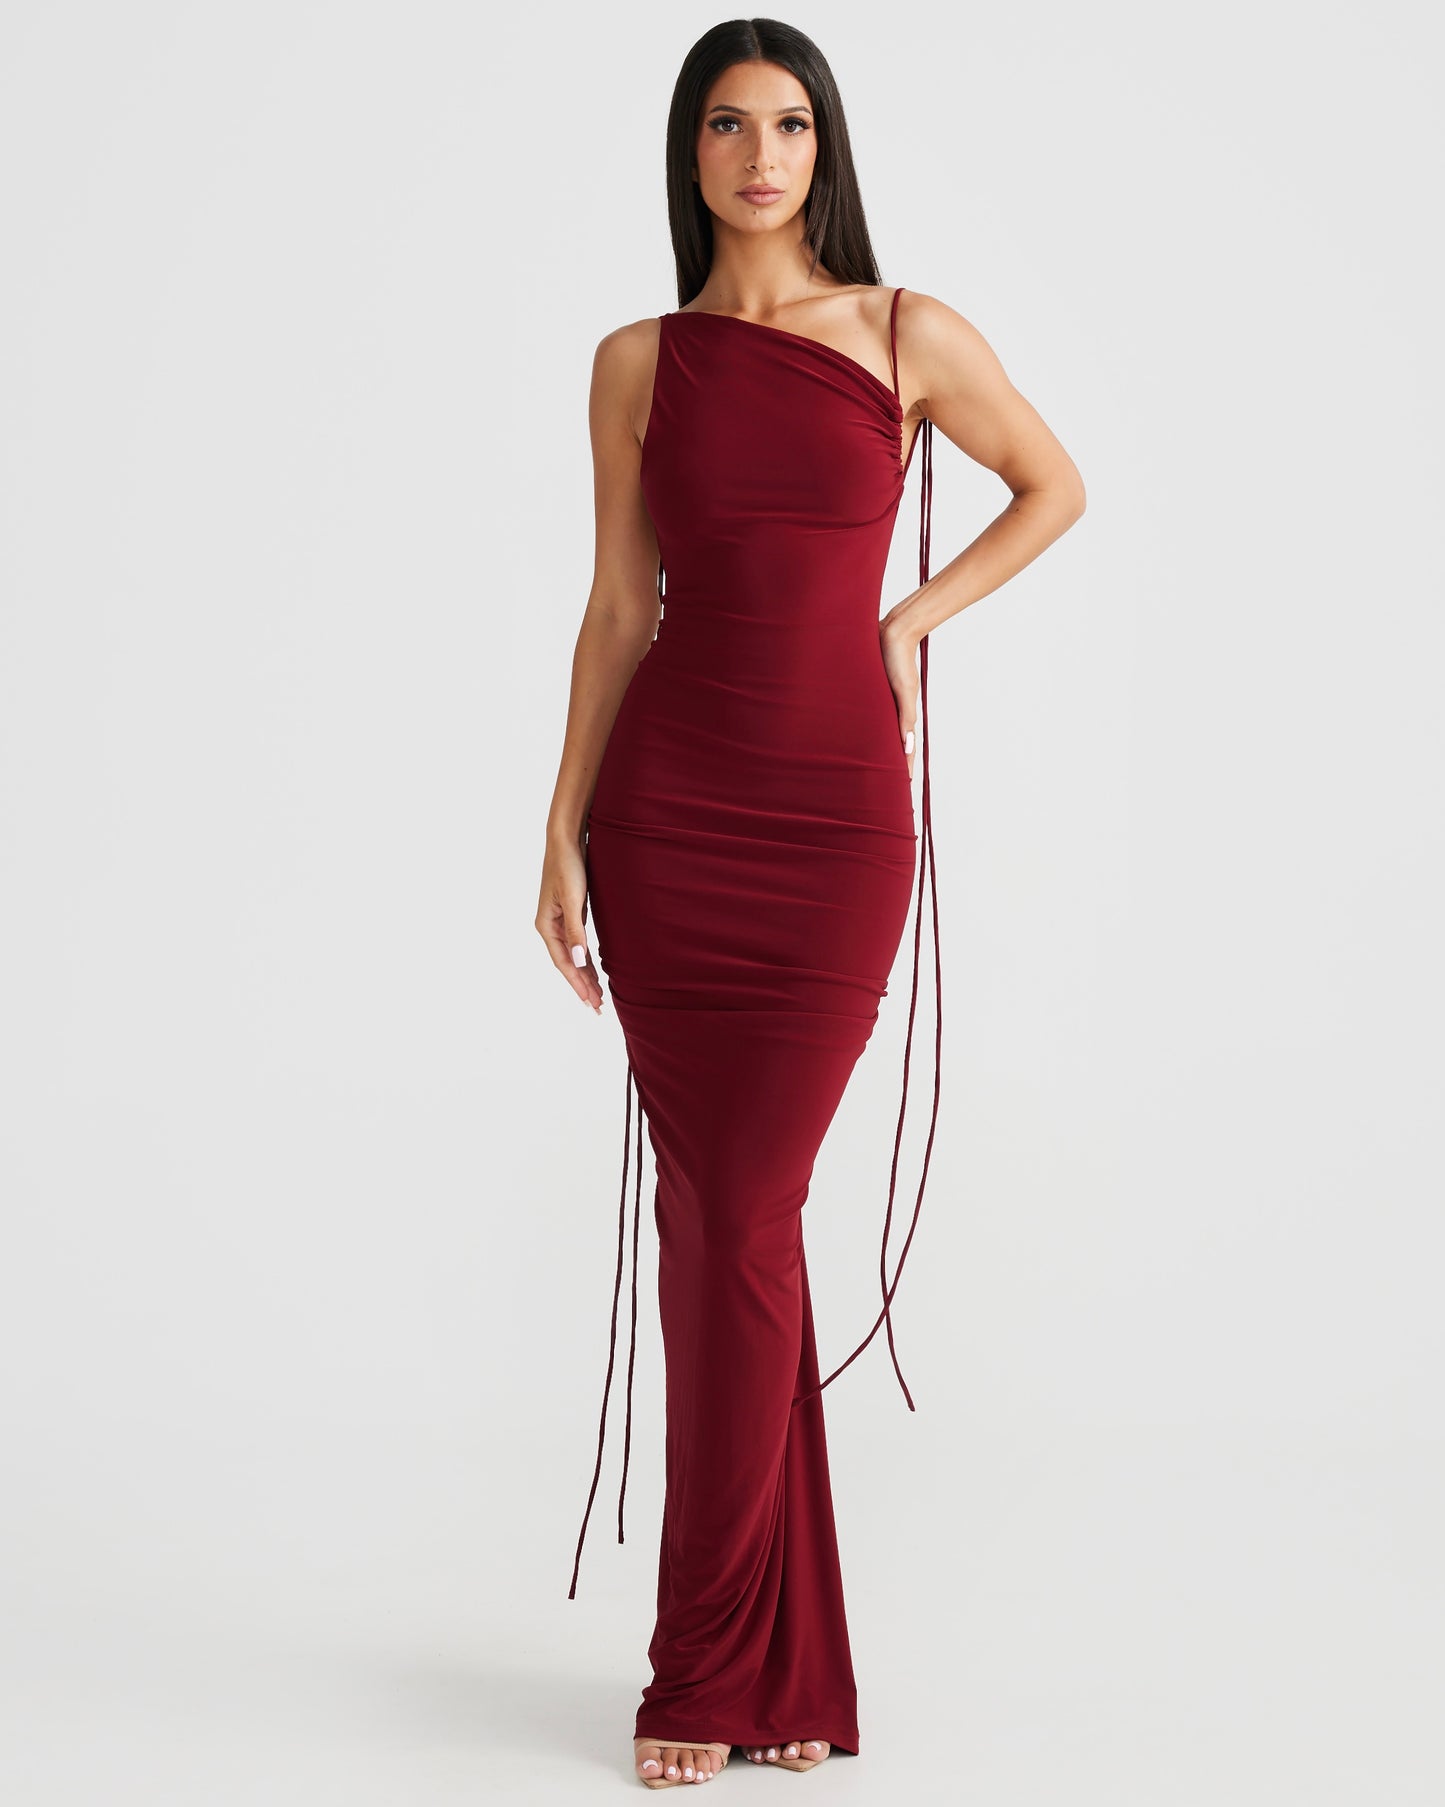 GIA GOWN - WINE